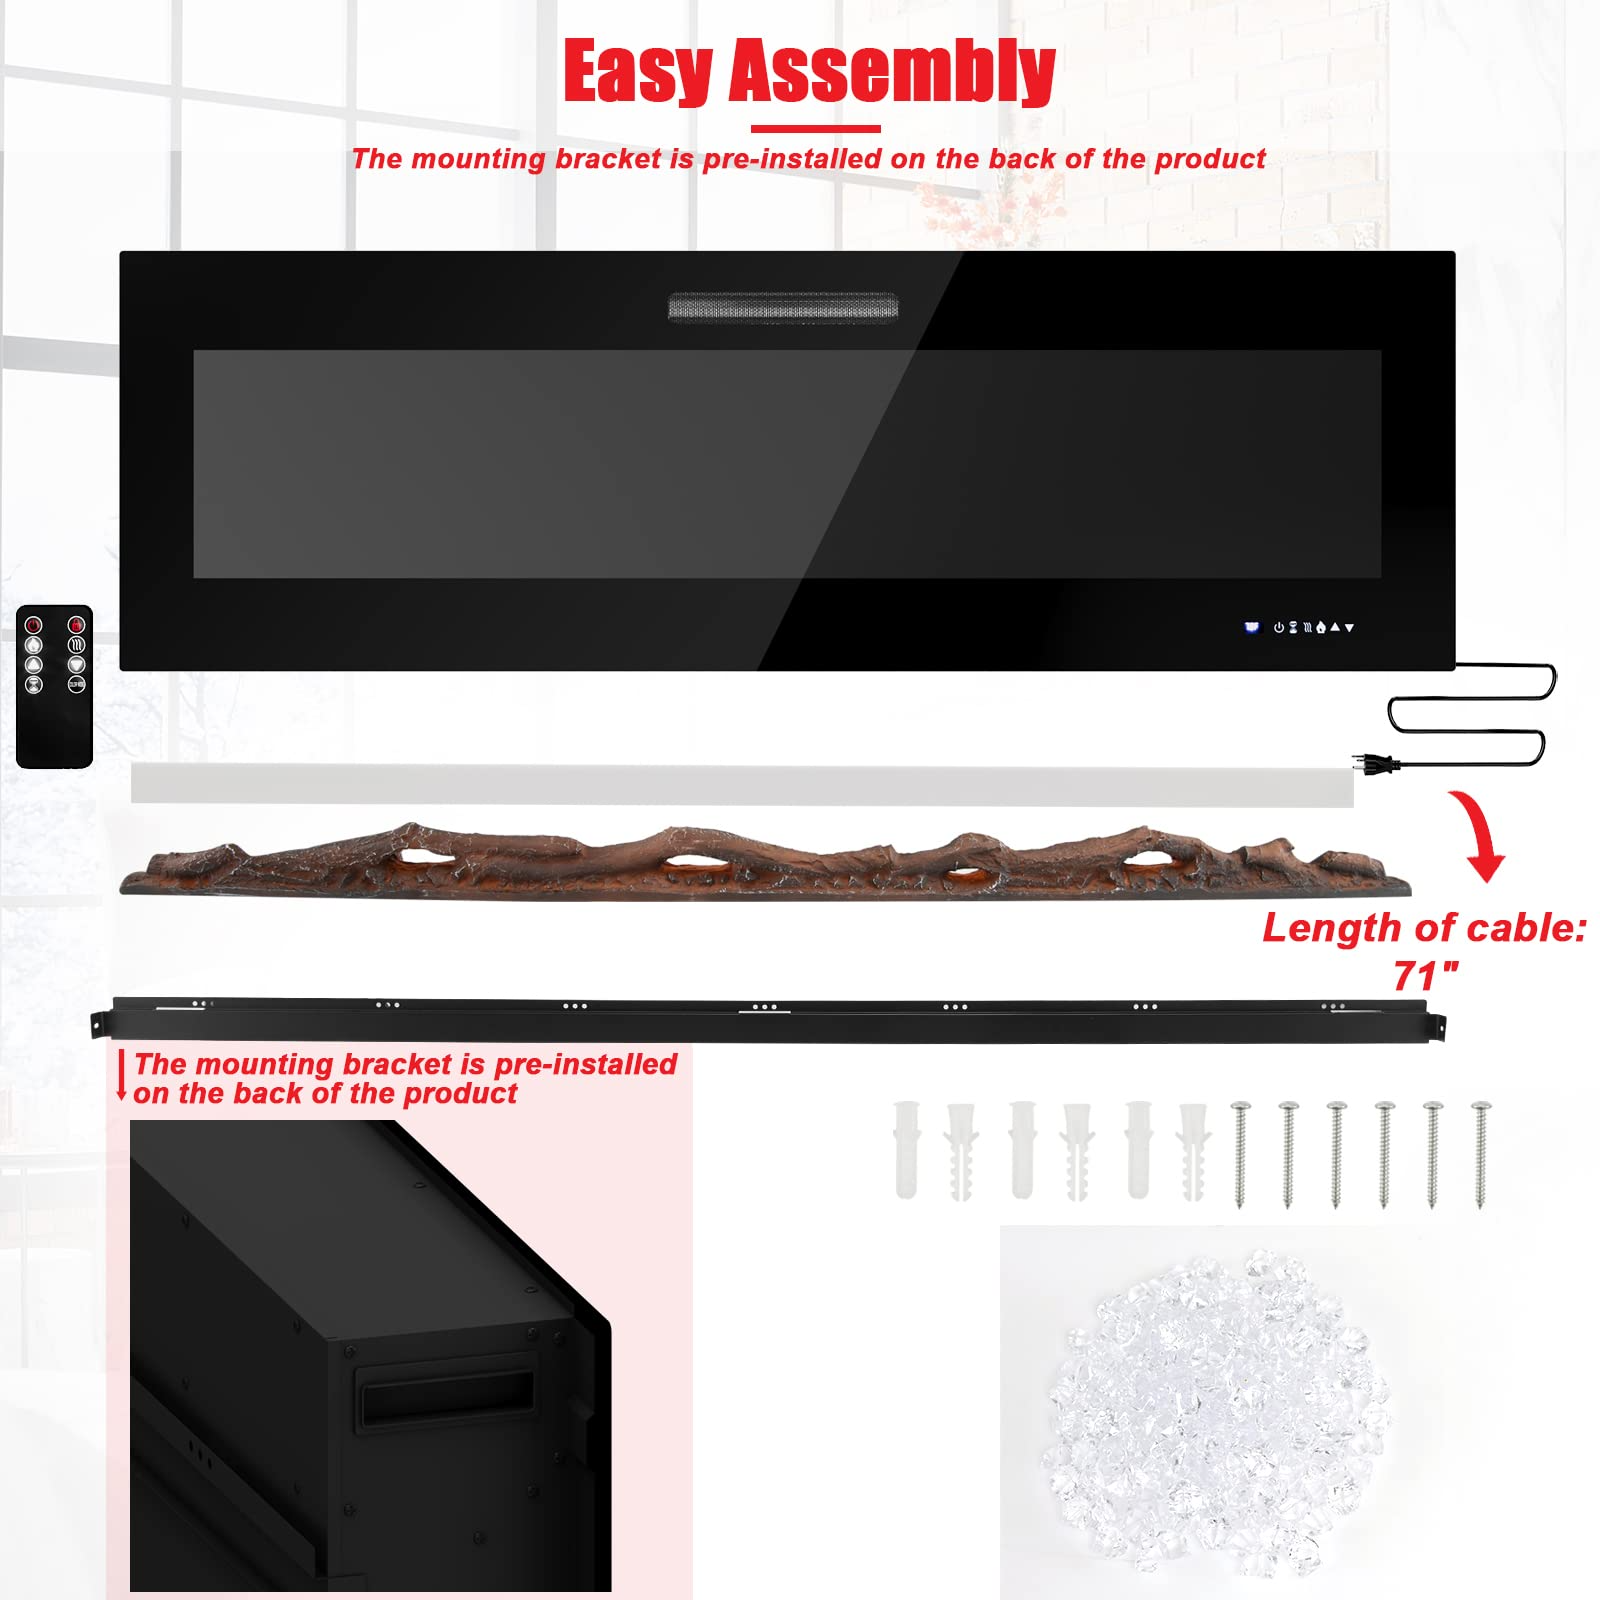 50 Inches Electric Fireplace Insert - Tangkula